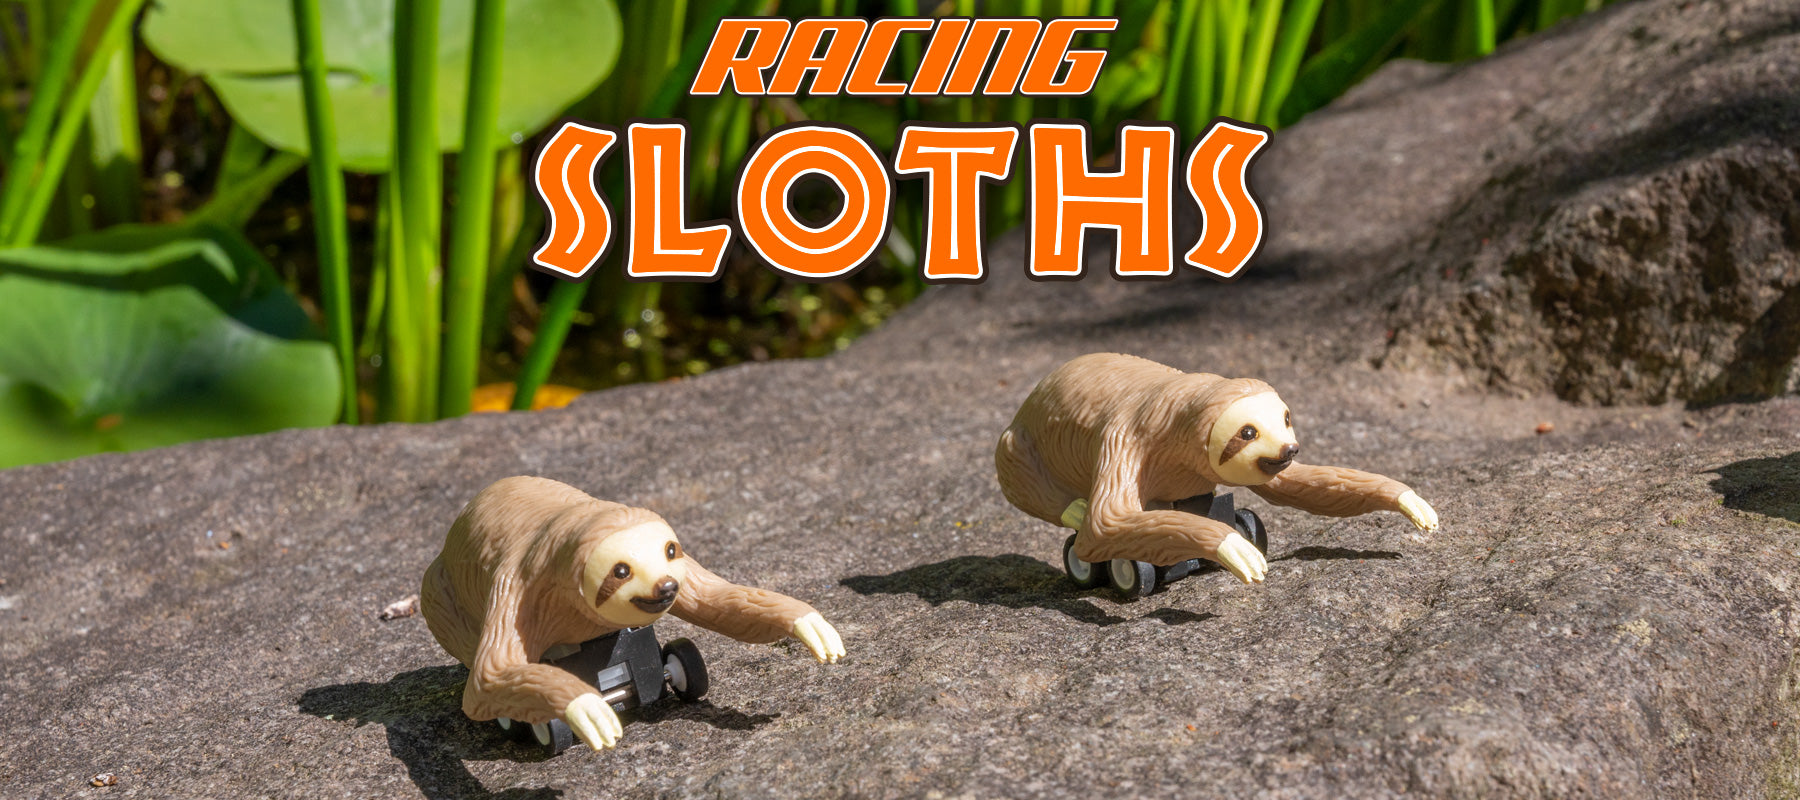 Two Racing Sloths on a rock.